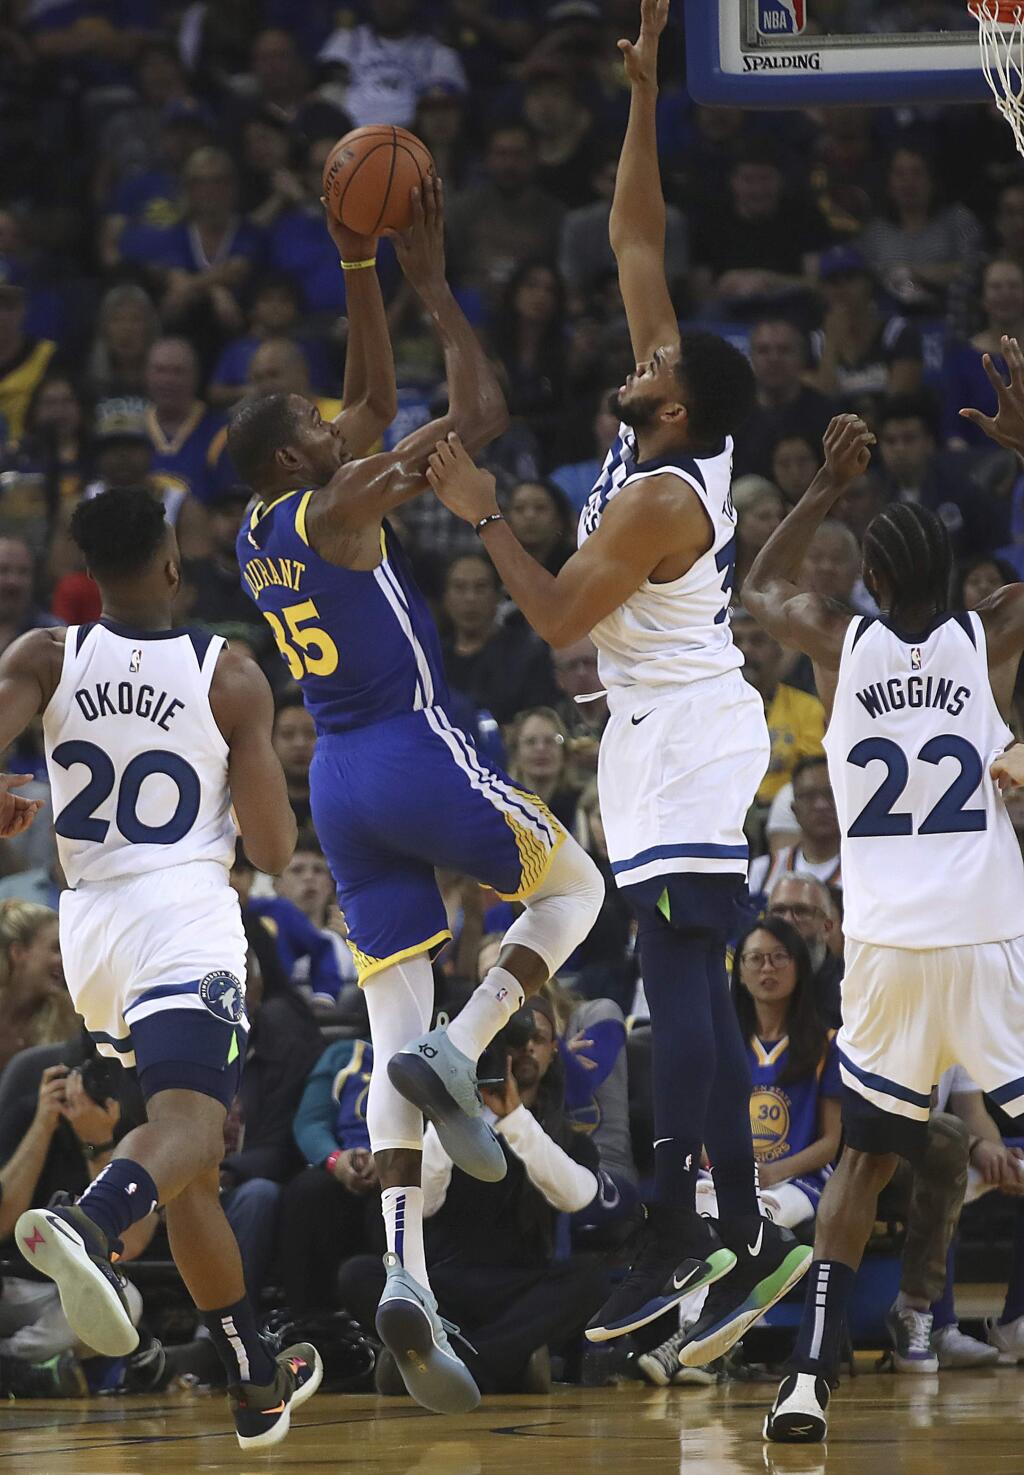 Golden State Warriors' Kevin Durant (35) shoots as Minnesota Timberwolves' Karl-Anthony Towns (32) defends during the first half of an NBA basketball game Friday, Nov. 2, 2018, in Oakland, Calif. (AP Photo/Ben Margot)